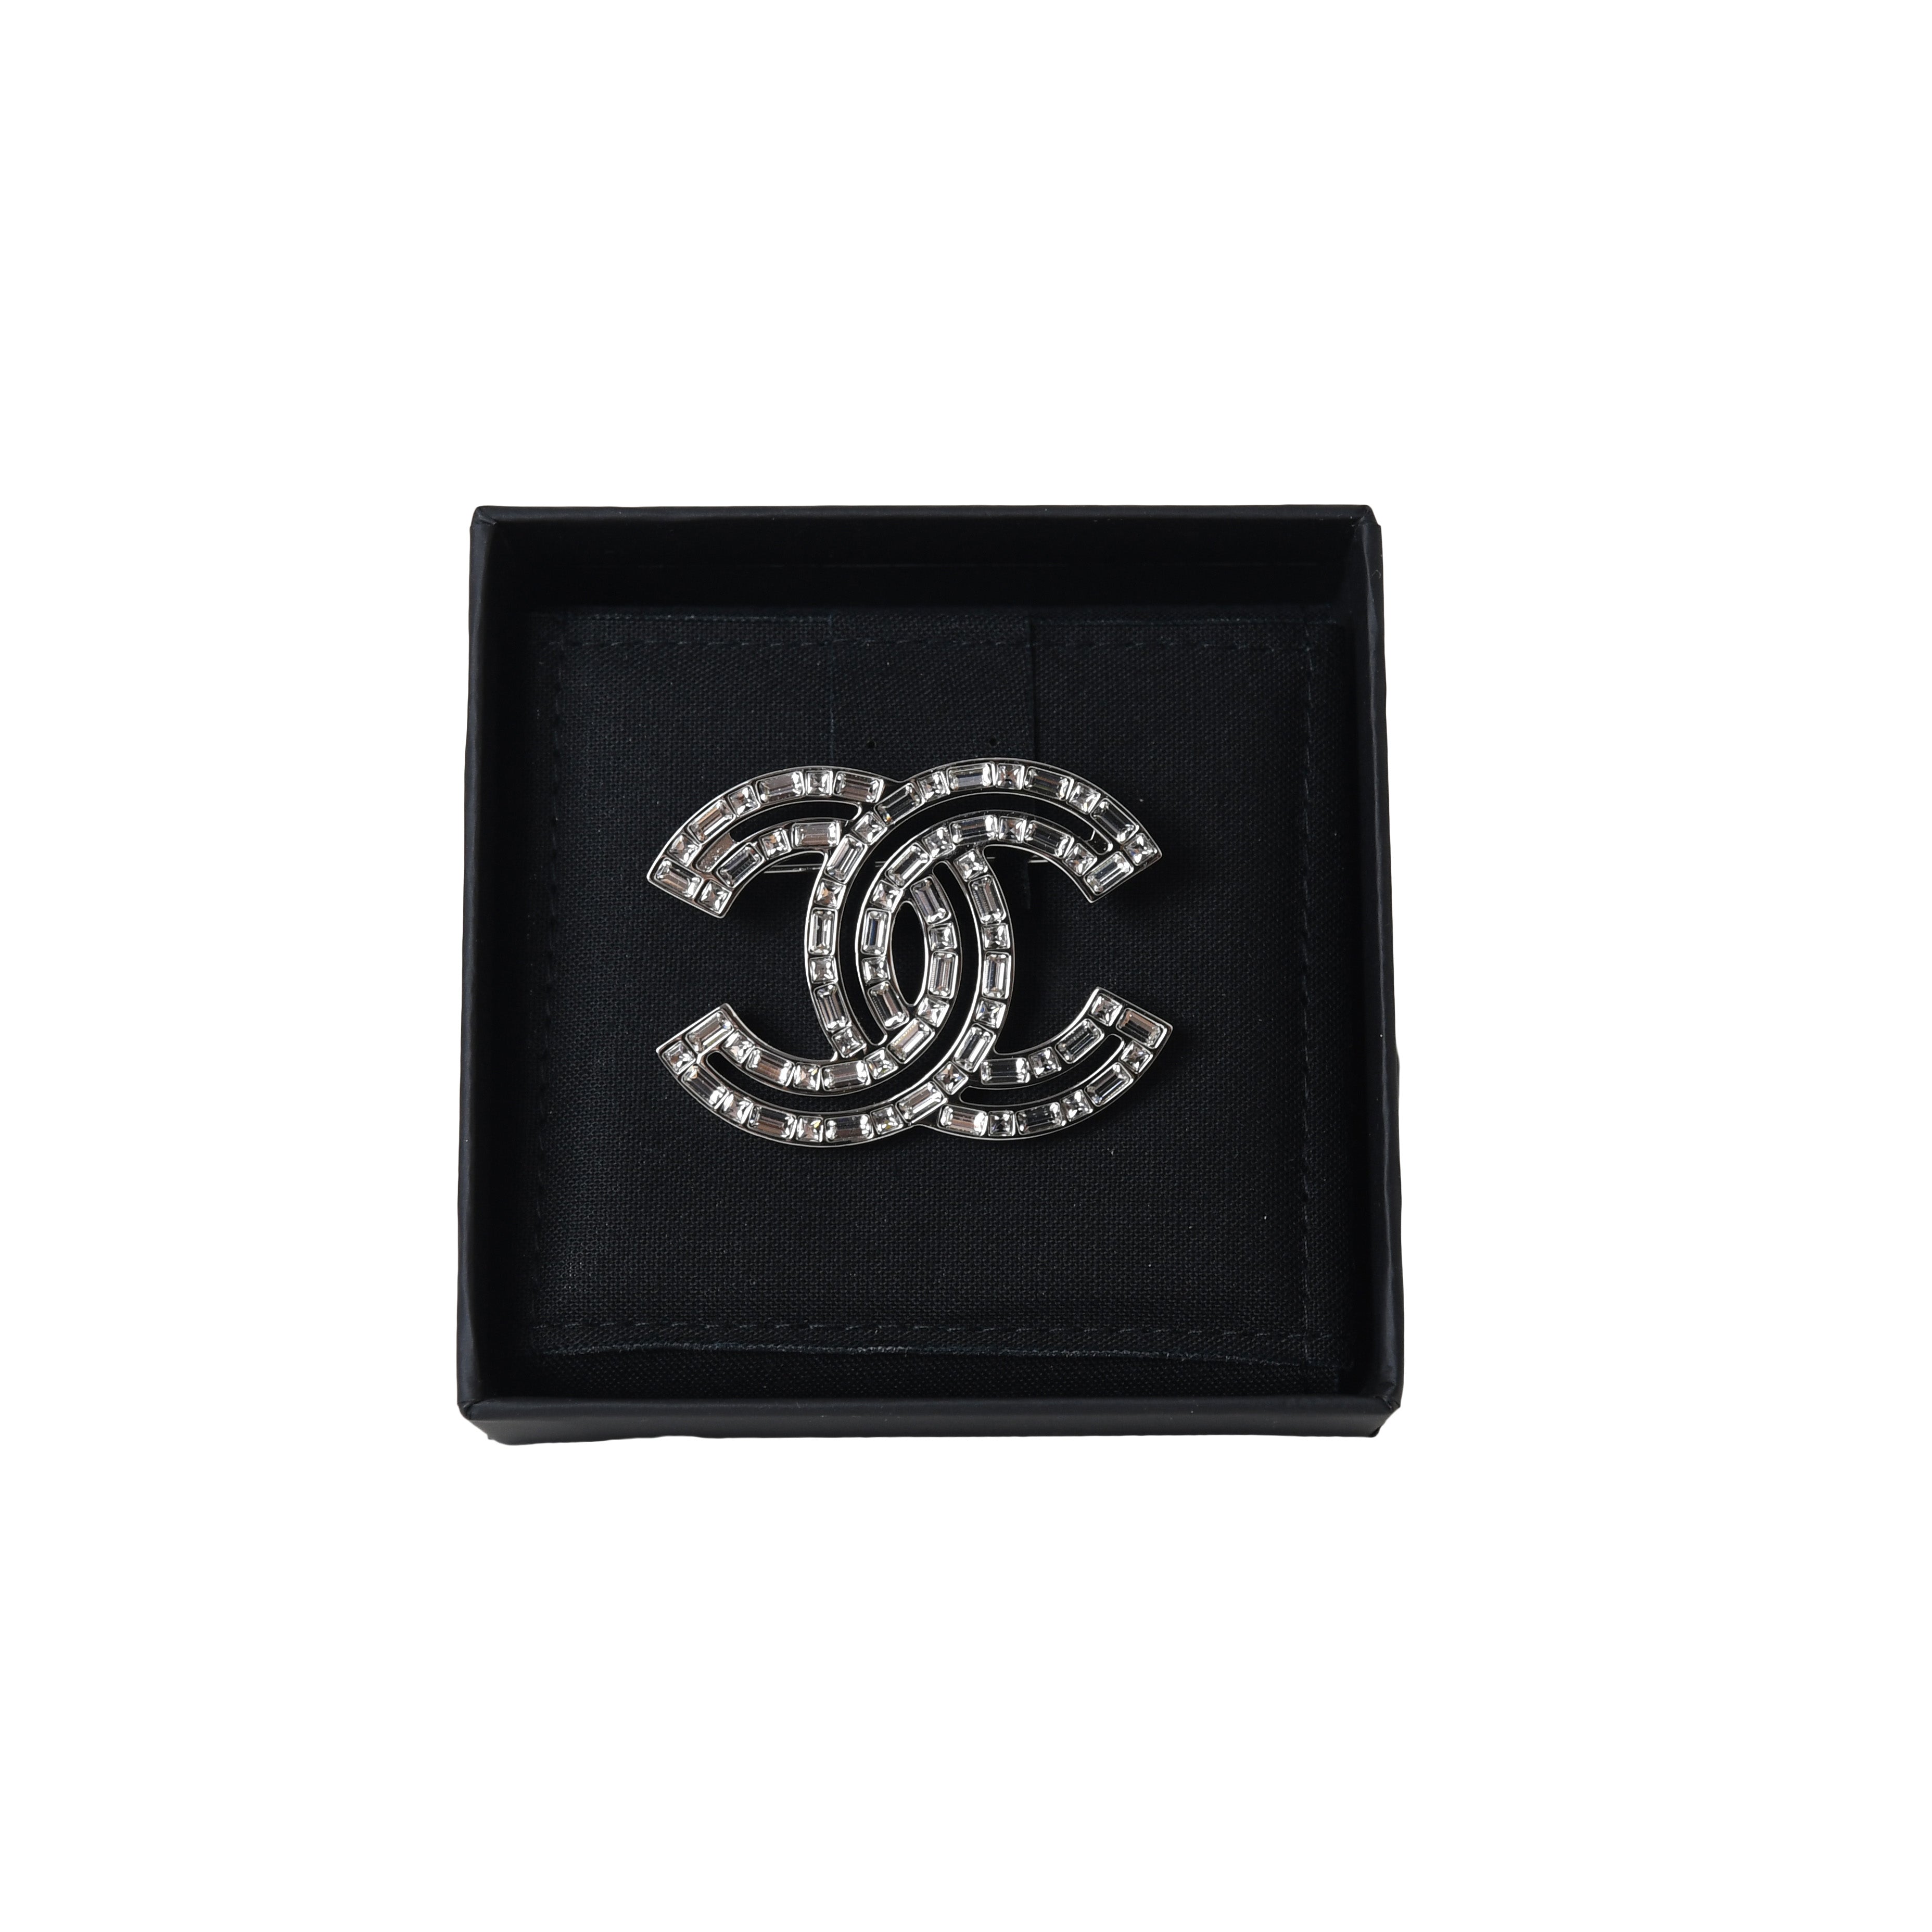 CHANEL Baguette Crystal CC Brooch Silver 349830